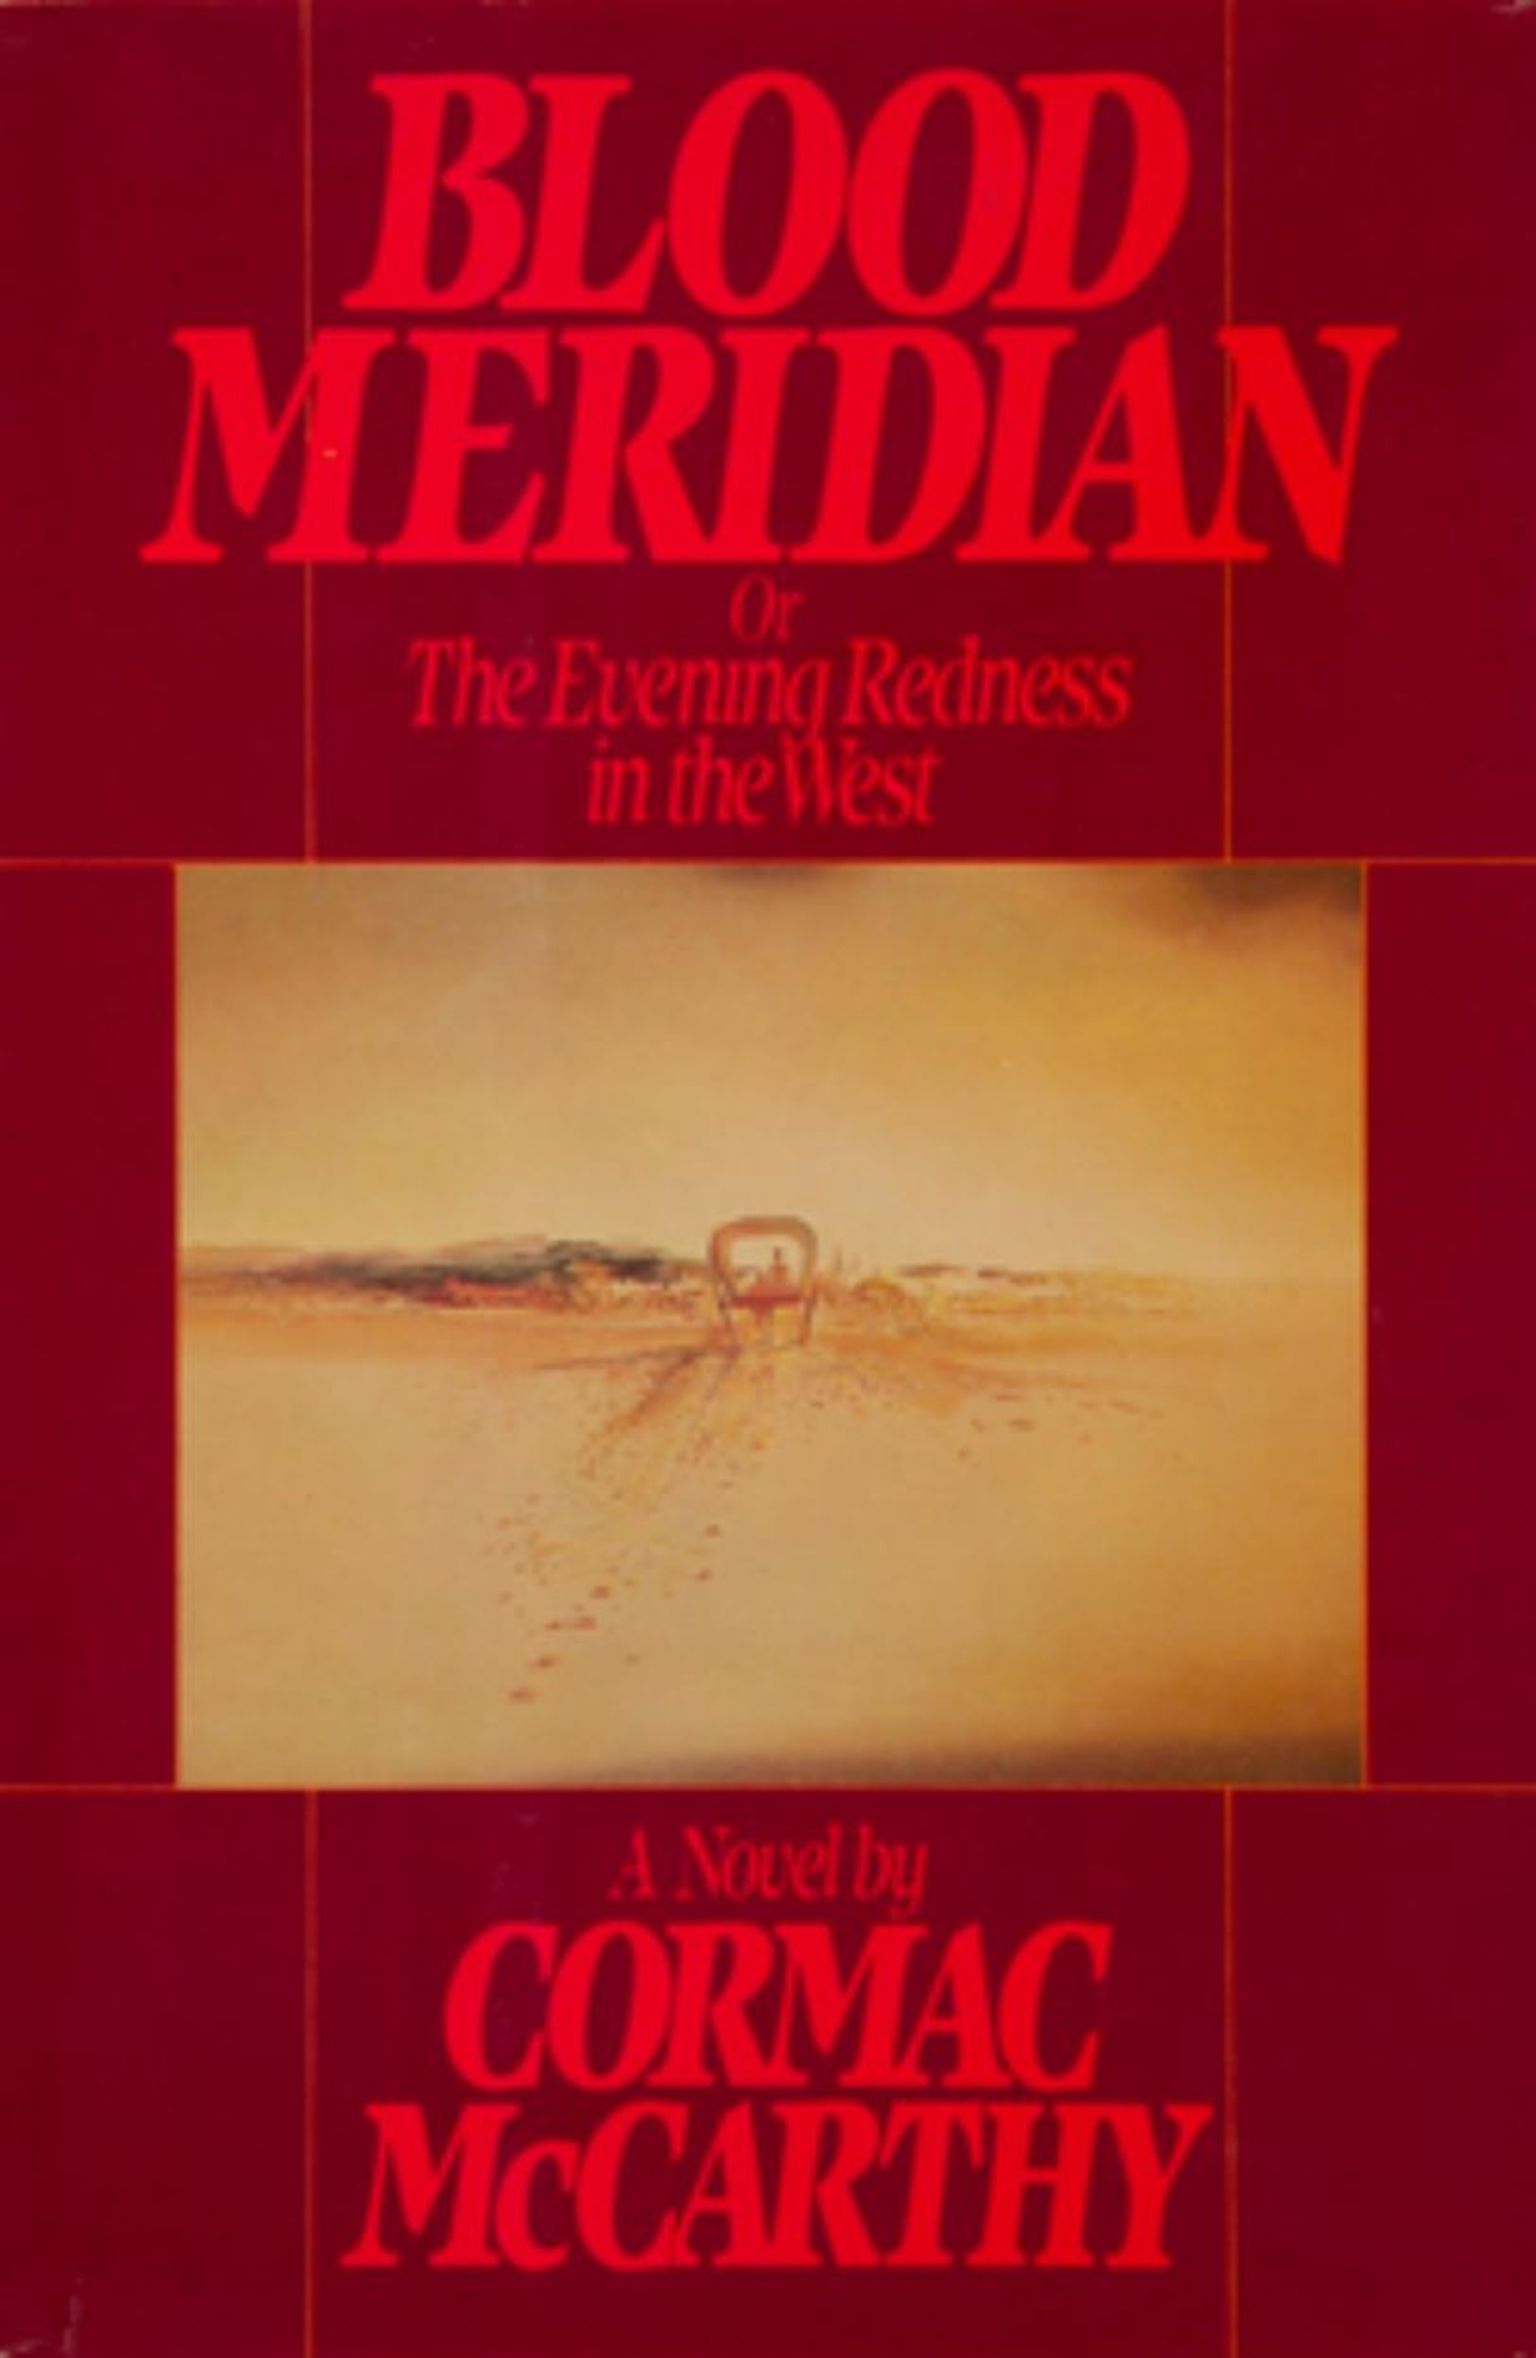 Book Recommendations - Blood Meridian